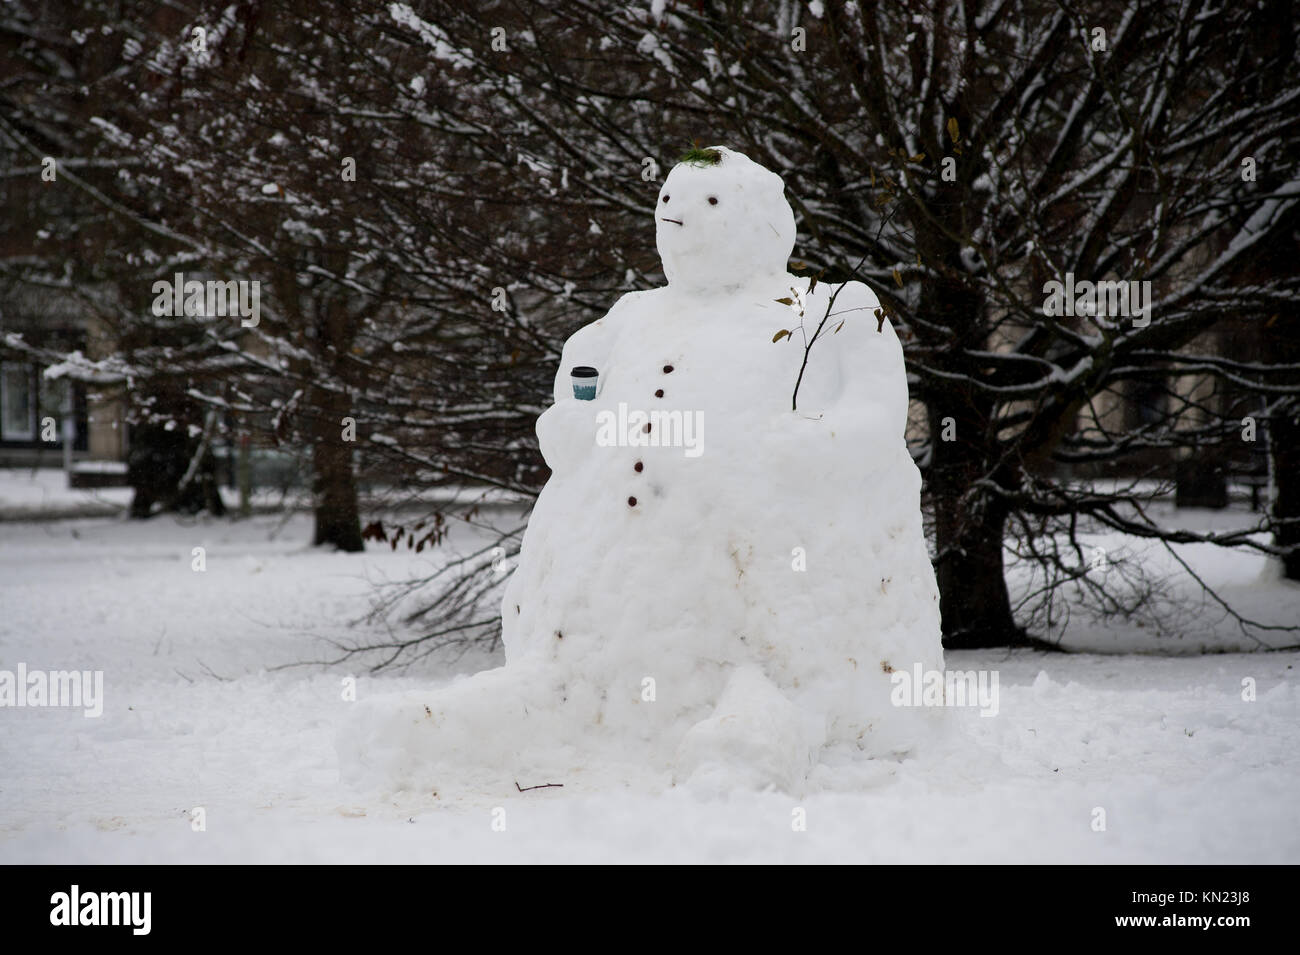 Welwyn Garden City, UK. 10th Dec, 2017. Heavy snow fell through out the night in Welwyn Garden City. The snow was ankle deep in places. Large snowman that was made in the park. Credit: Andrew Steven Graham/Alamy Live News Stock Photo